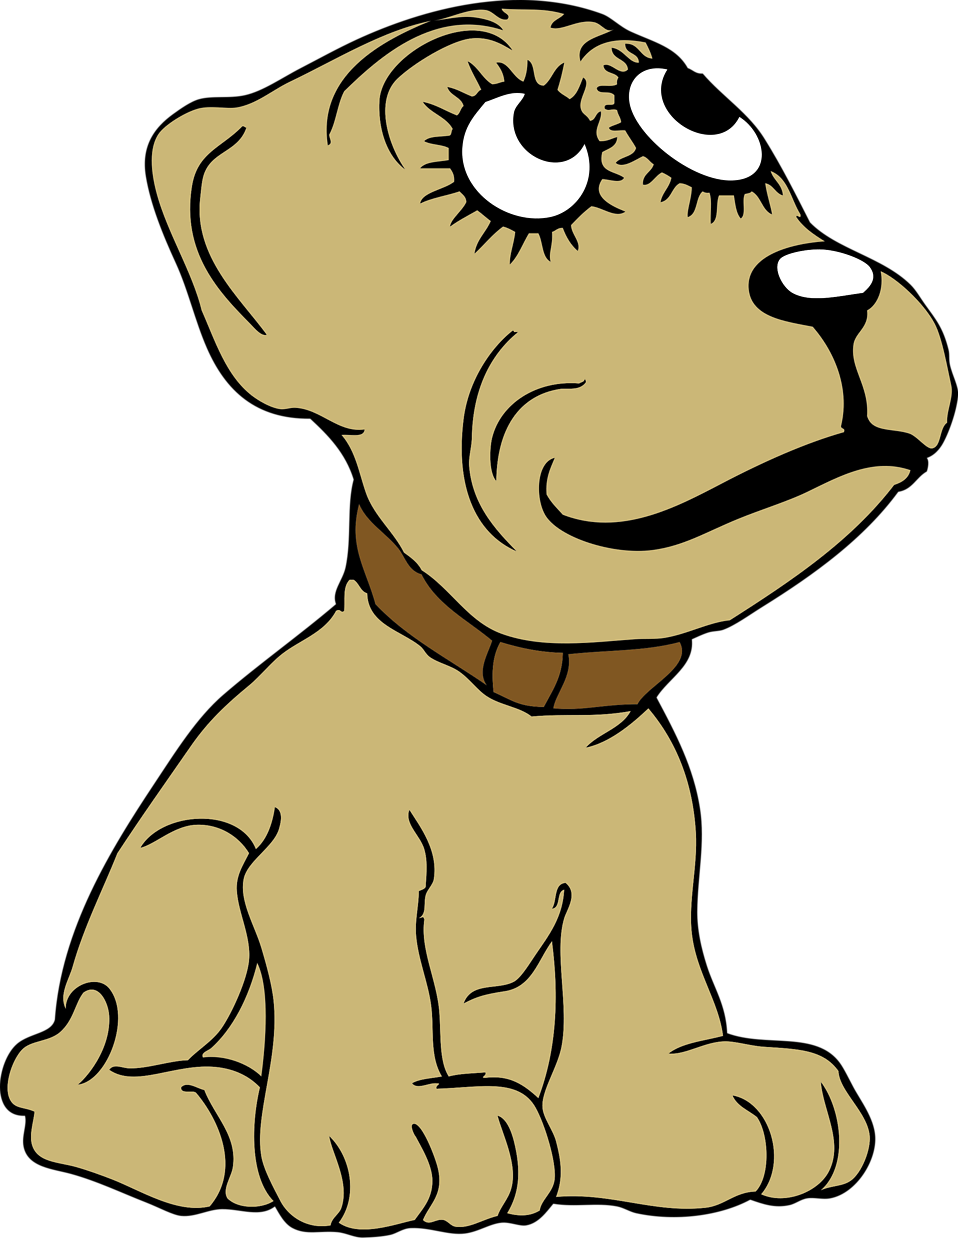 dogs and puppies cartoon. Illustration of a cartoon dog.